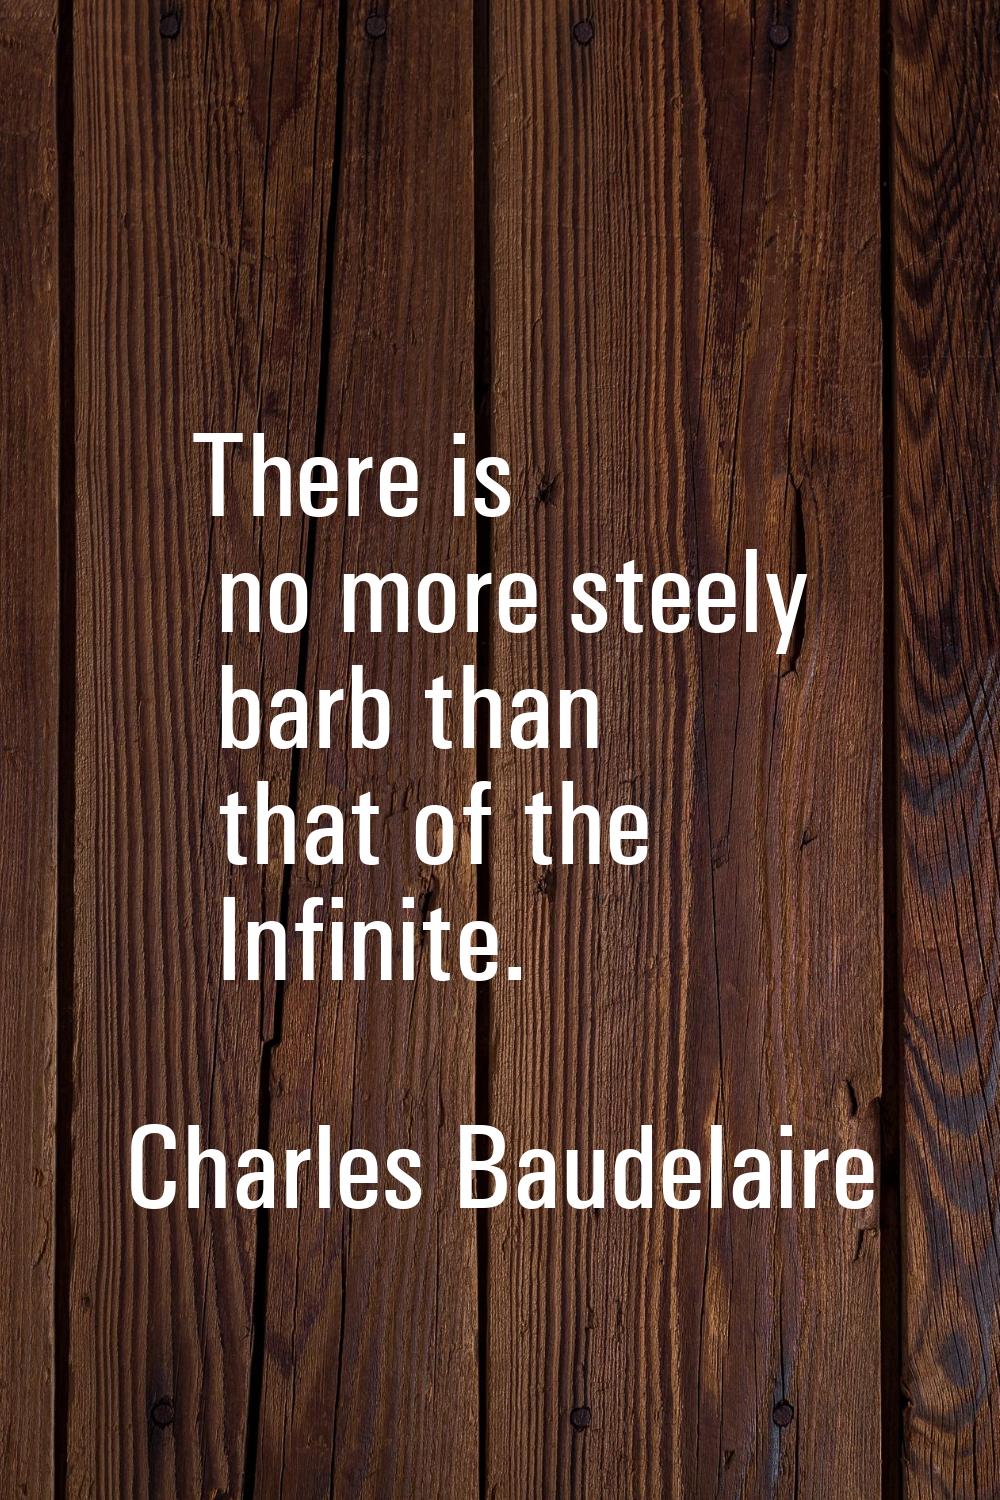 There is no more steely barb than that of the Infinite.